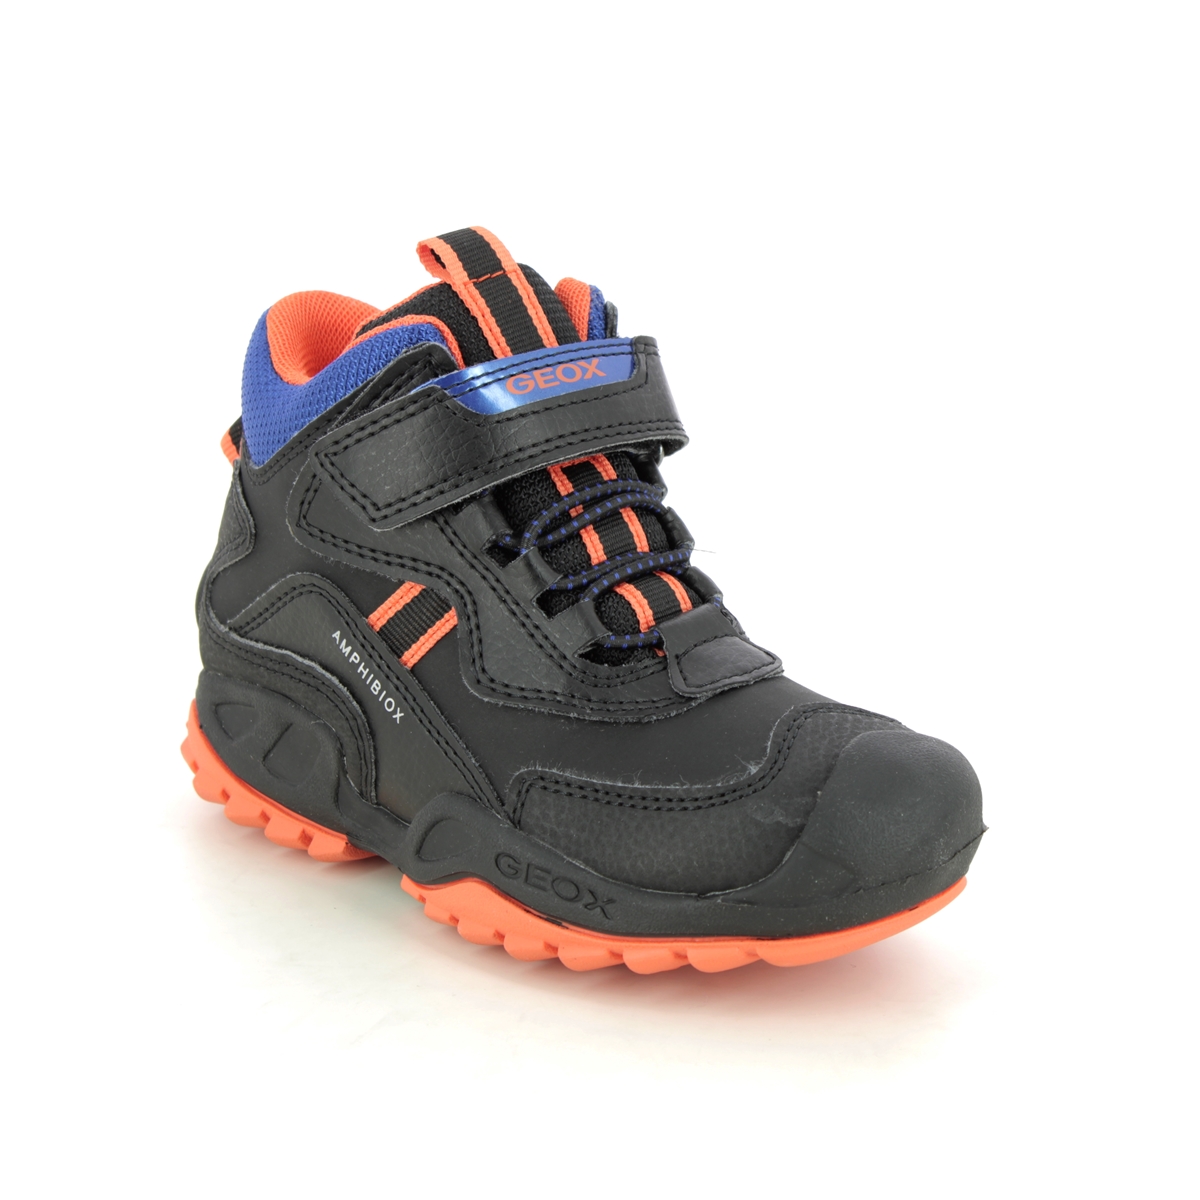 Geox - Savage Boot Tex (Black) J261Wb-C0399 In Size 36 In Plain Black For School For kids